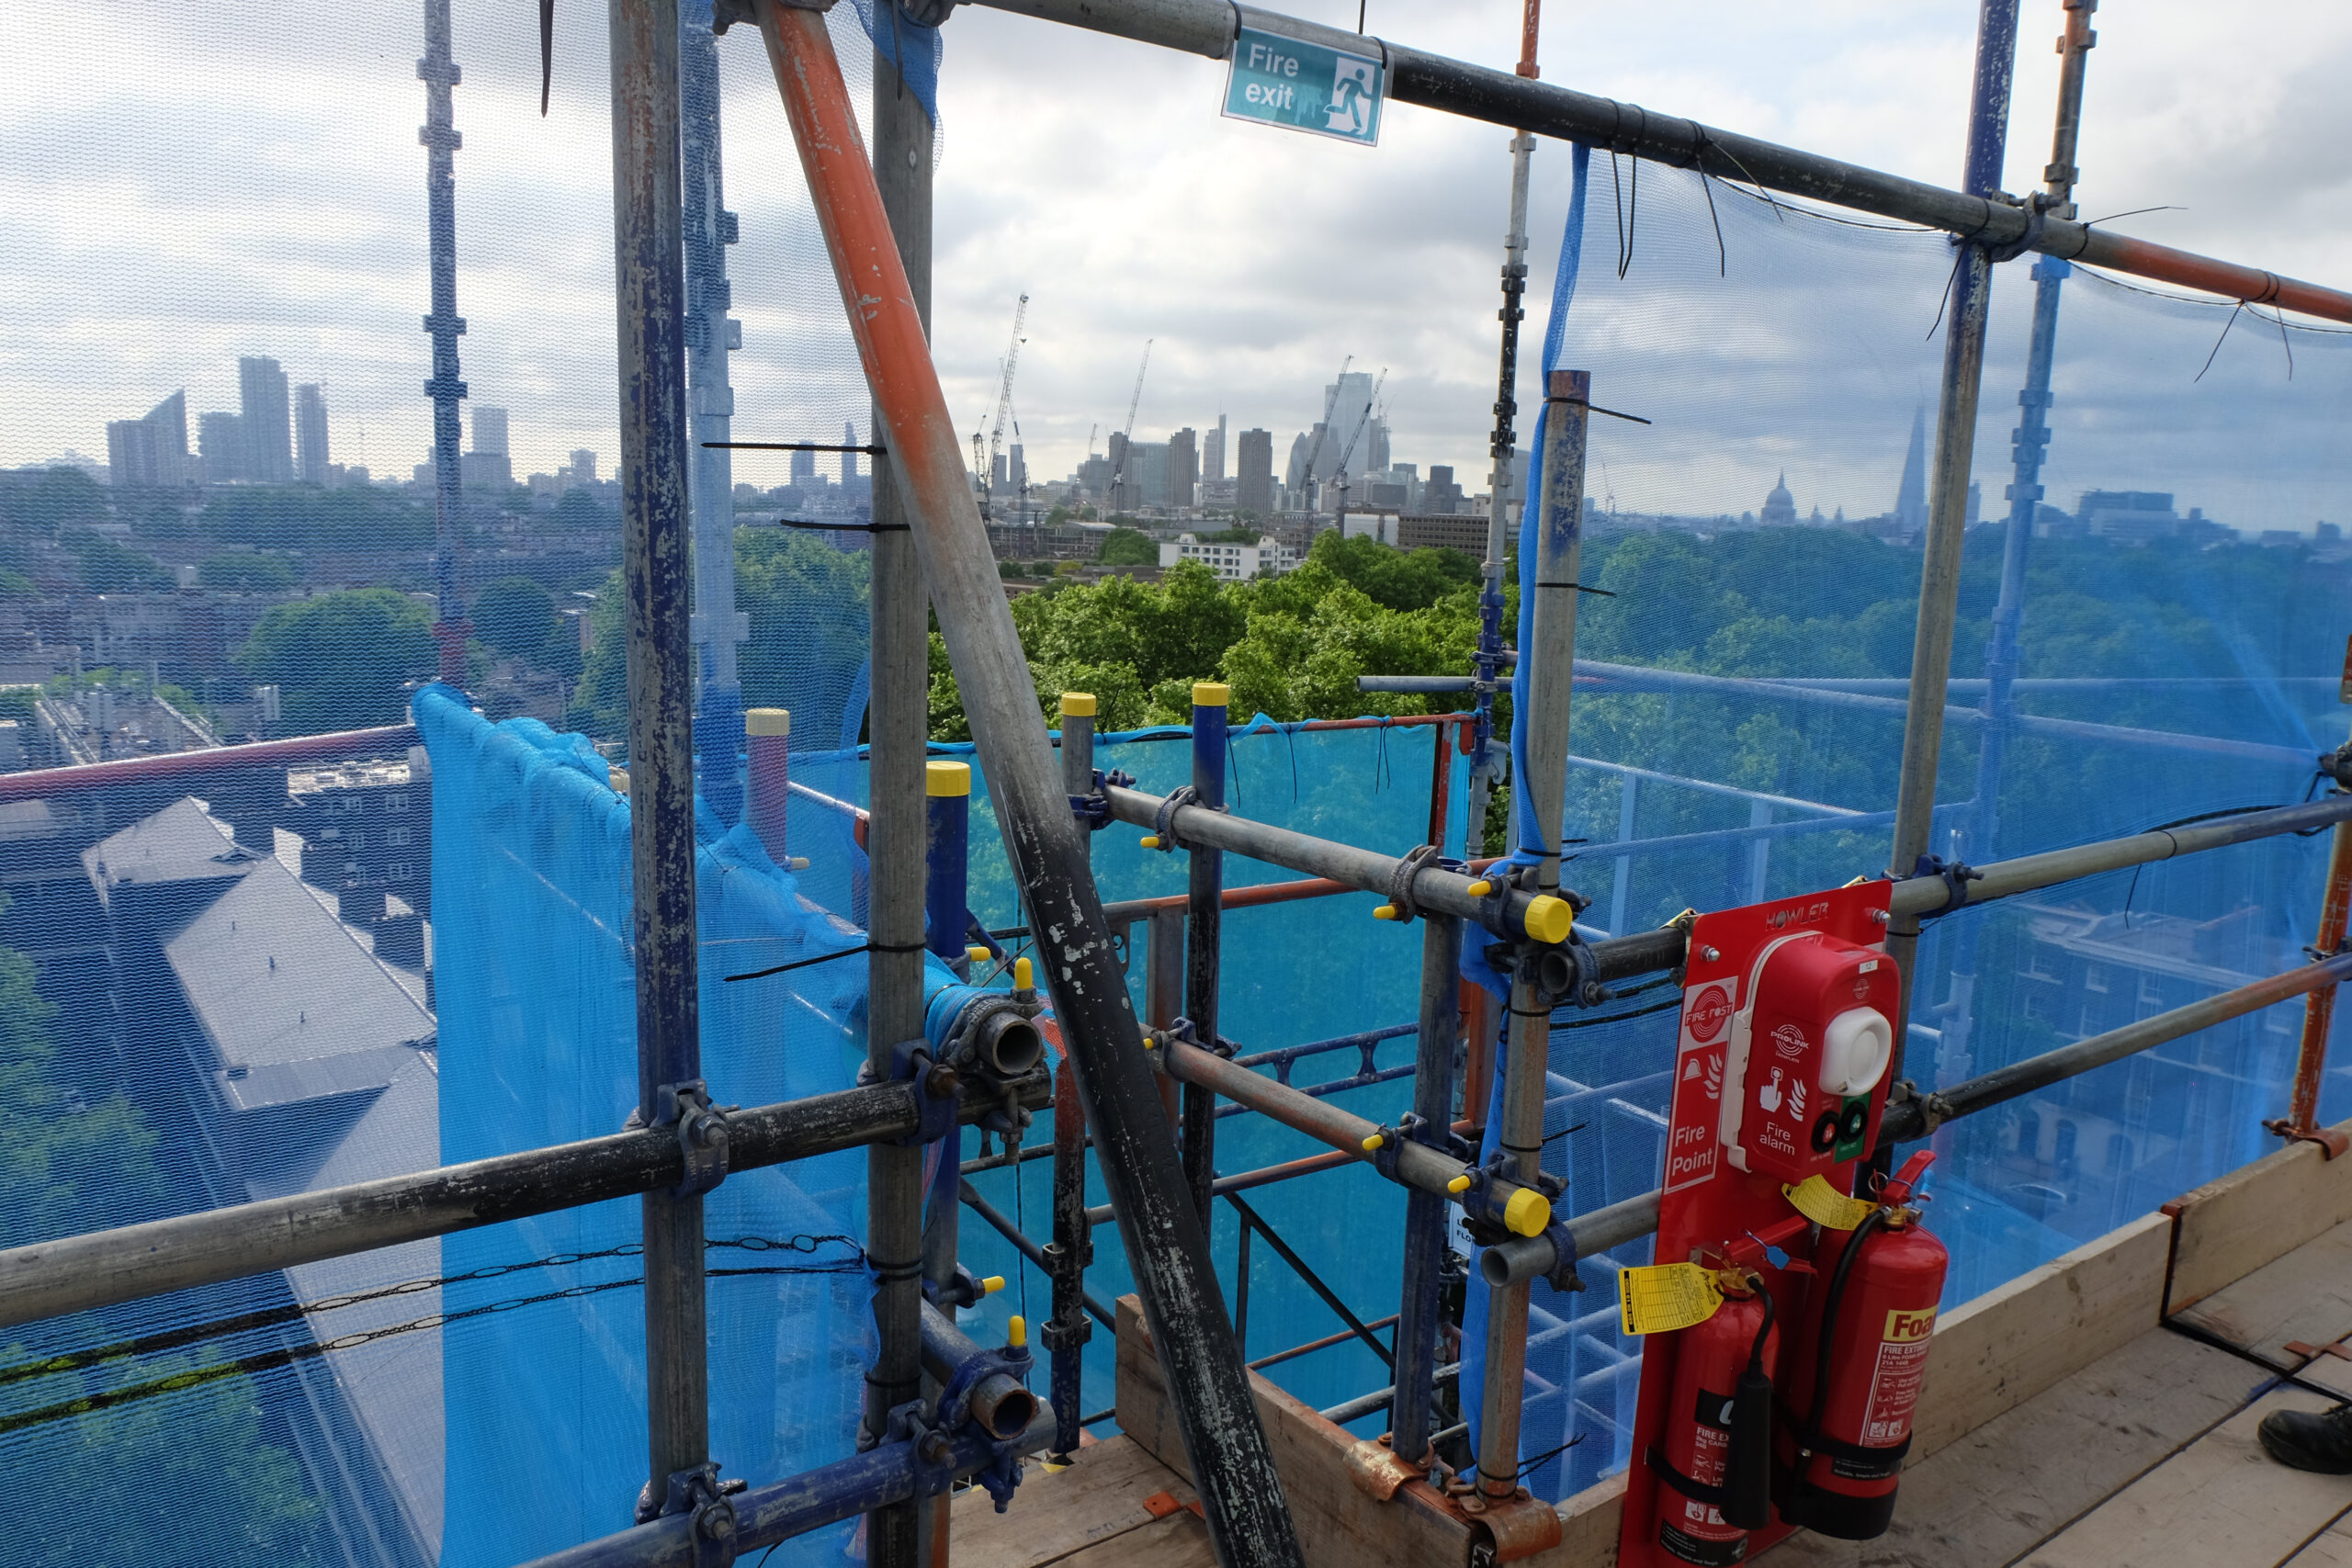 howler scaffpost fire point with prolink and two fire extinguishers